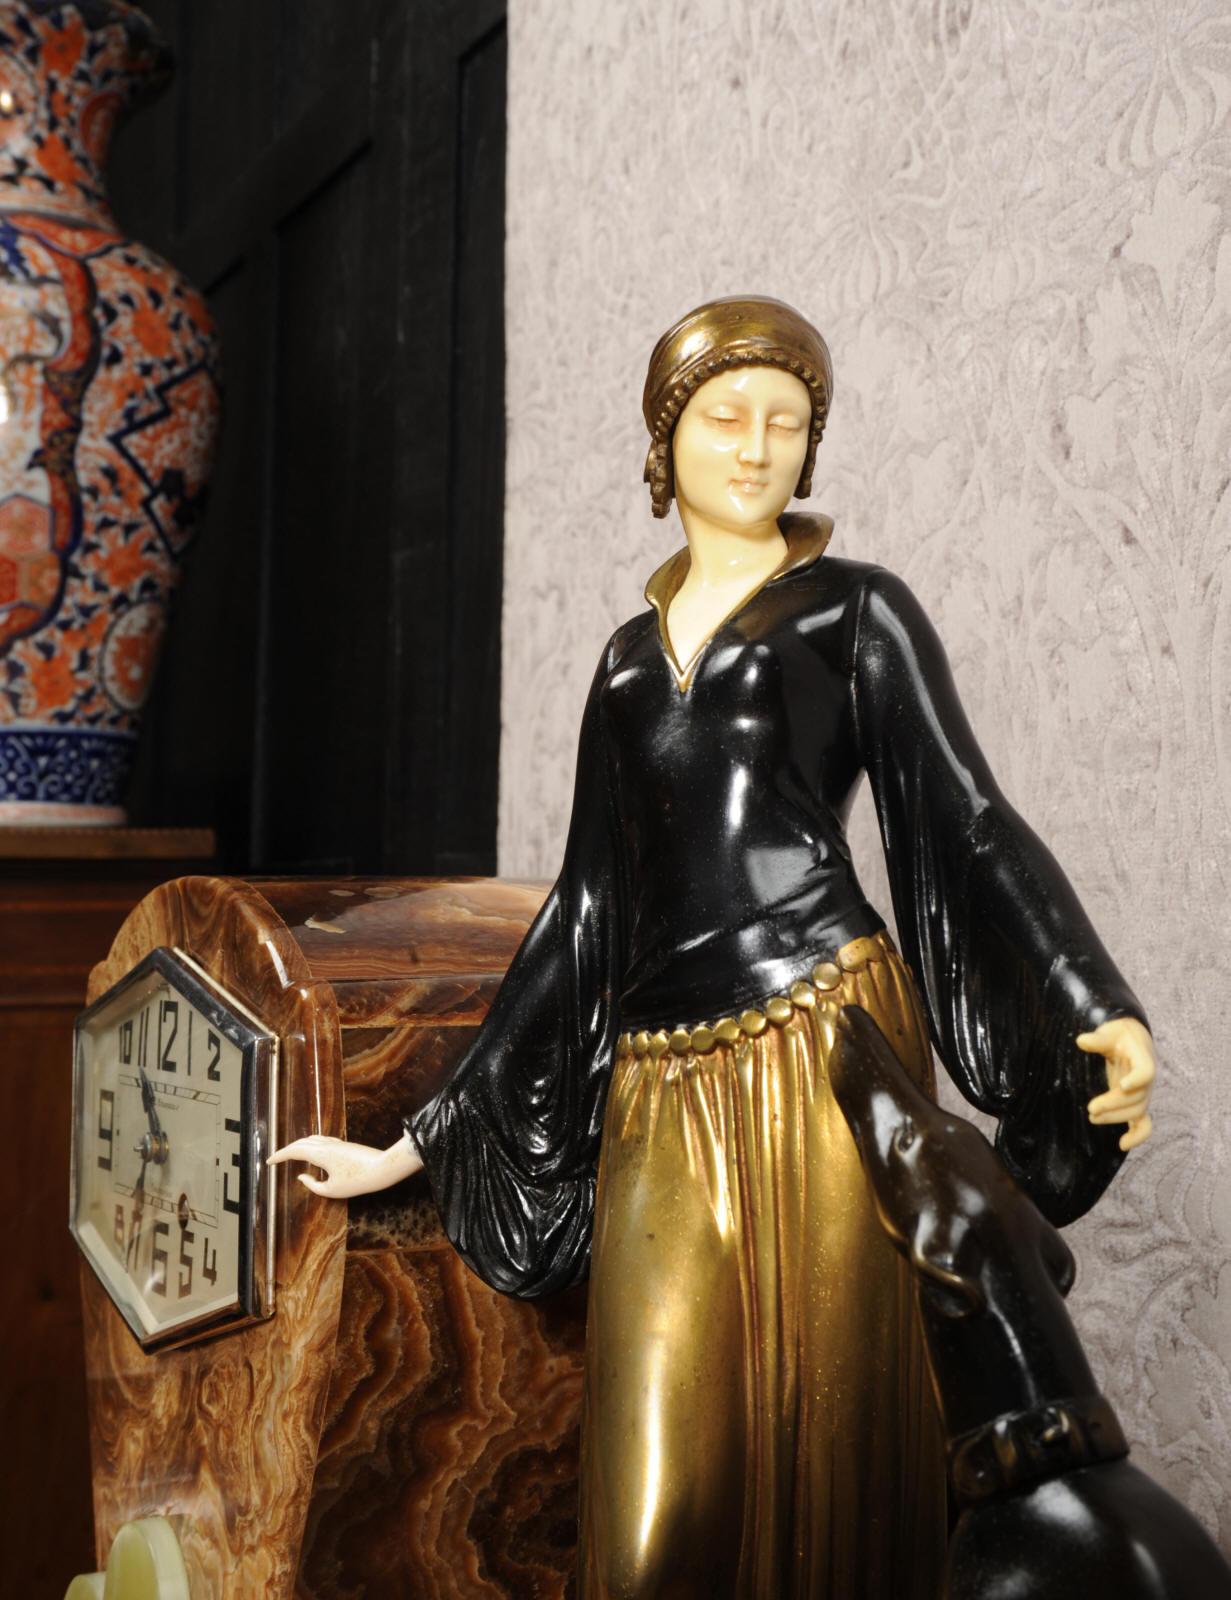 Patinated Art Deco French Clock by Menneville 'Ugo Cipriani, 1897 – 1960'